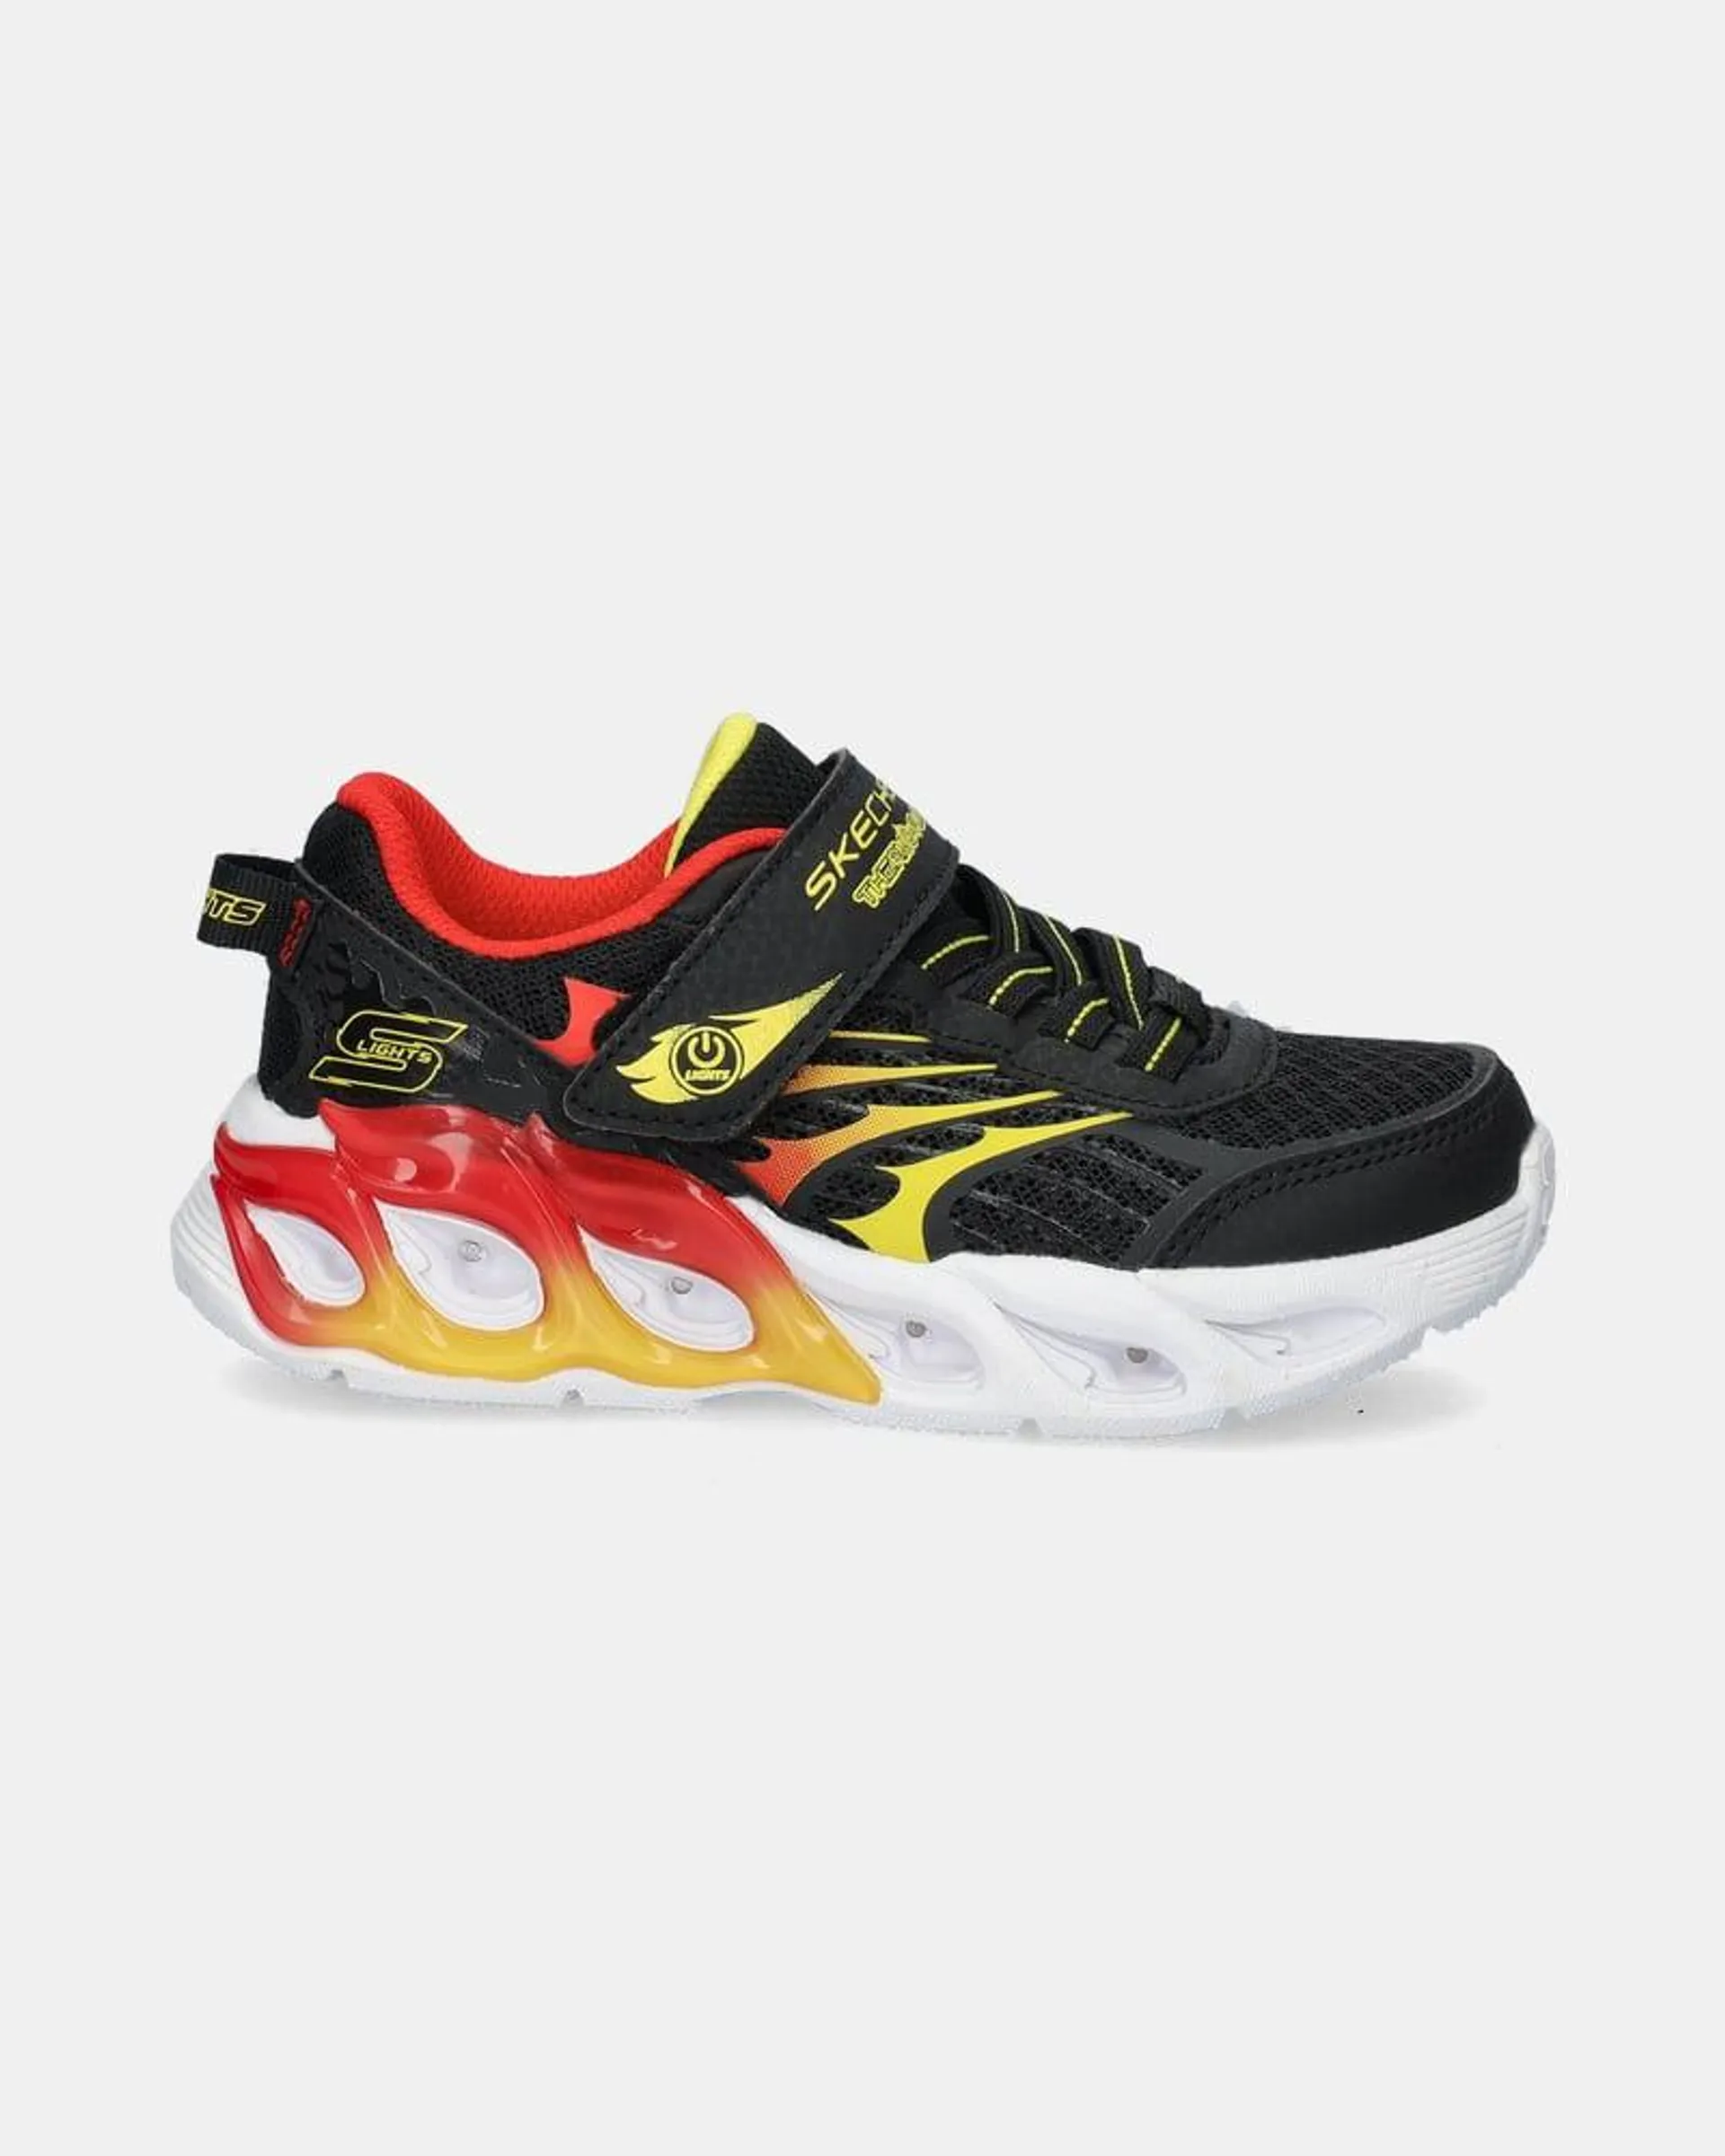 Skechers S-Lights Thermo- Flash 2.0